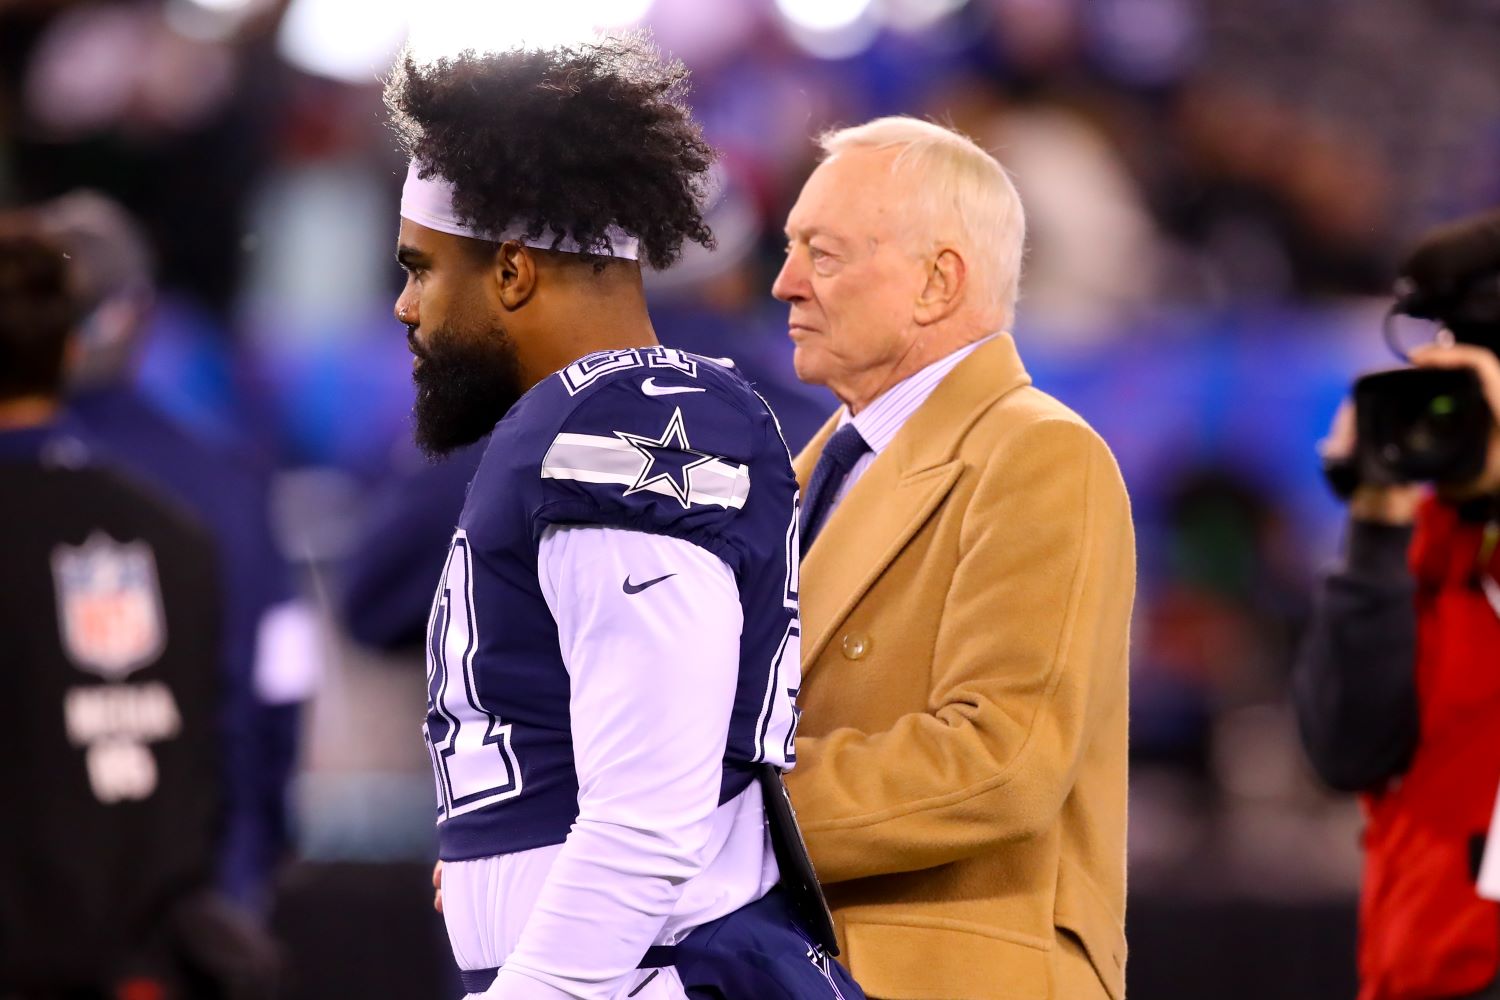 Jerry Jones calling Ezekiel Elliott "our best player" is a huge insult to Cowboys fans' intelligence based on the running back's recent play.